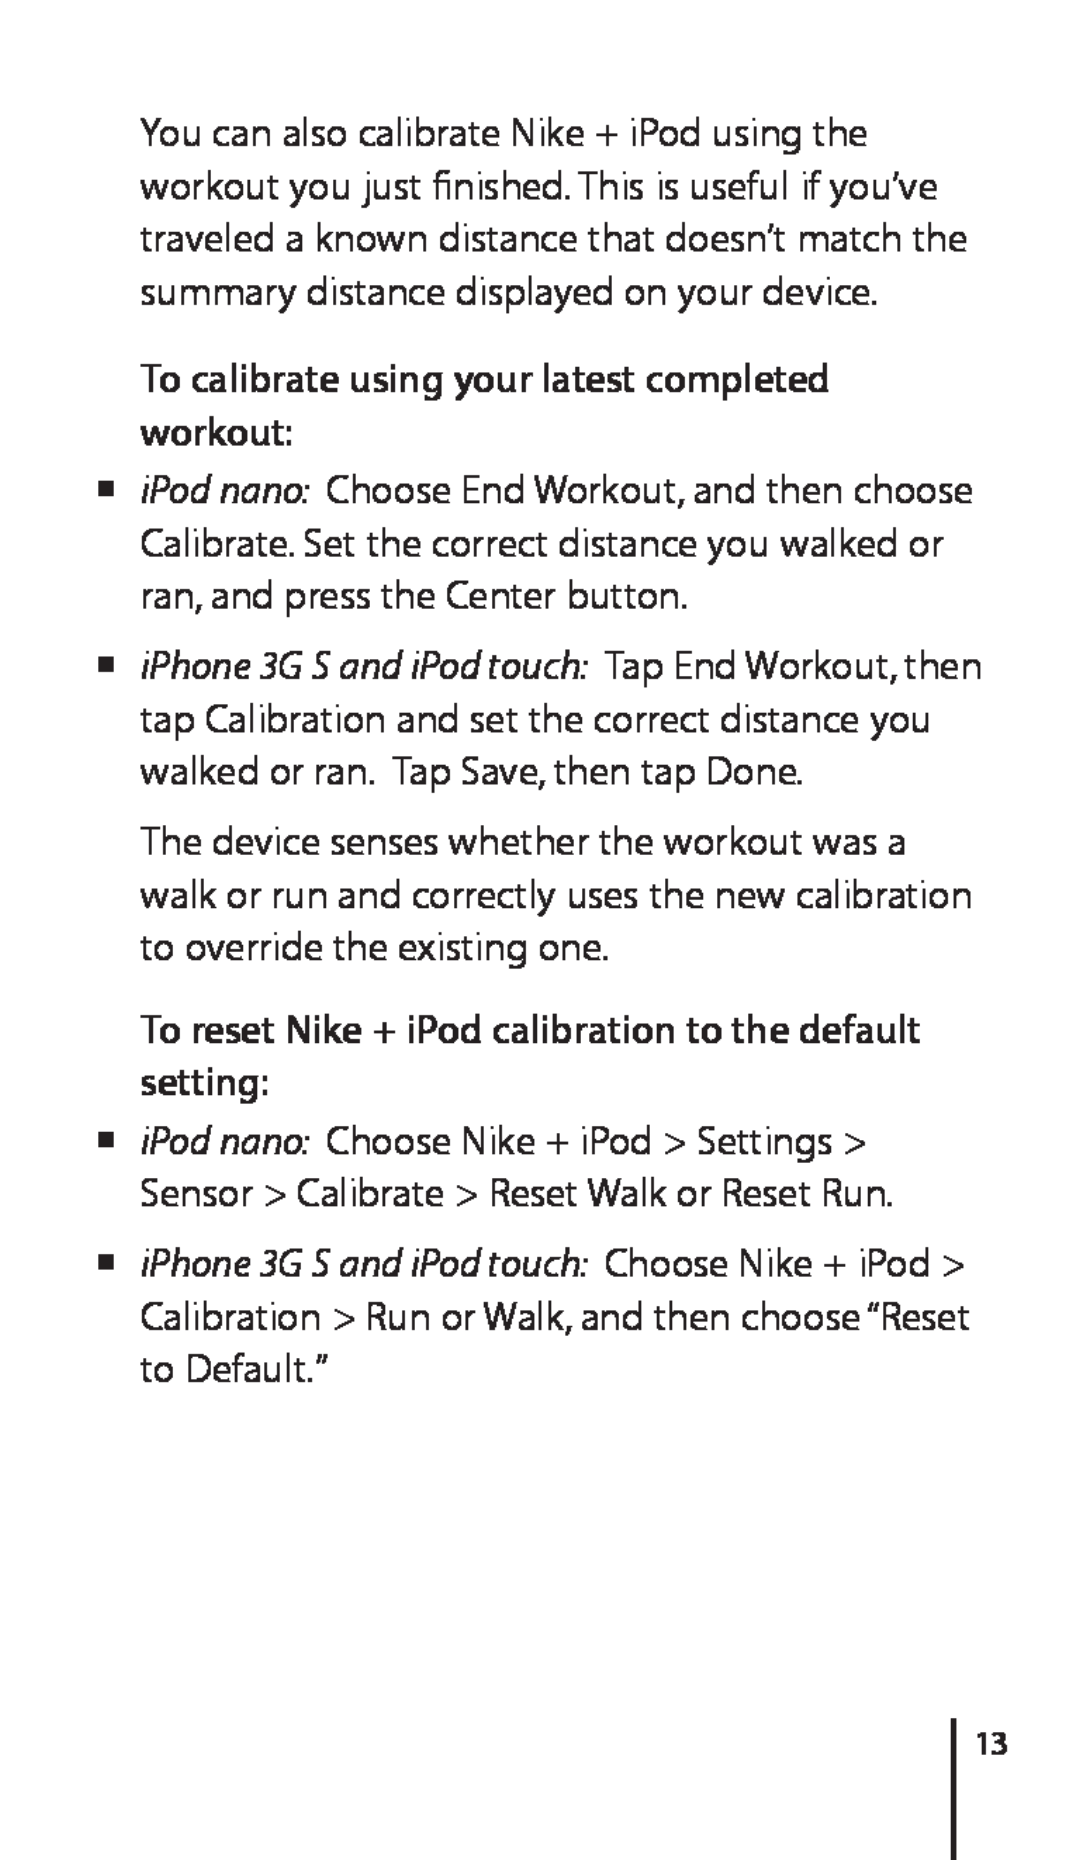 Apple 034-4945-A To calibrate using your latest completed workout, To reset Nike + iPod calibration to the default setting 